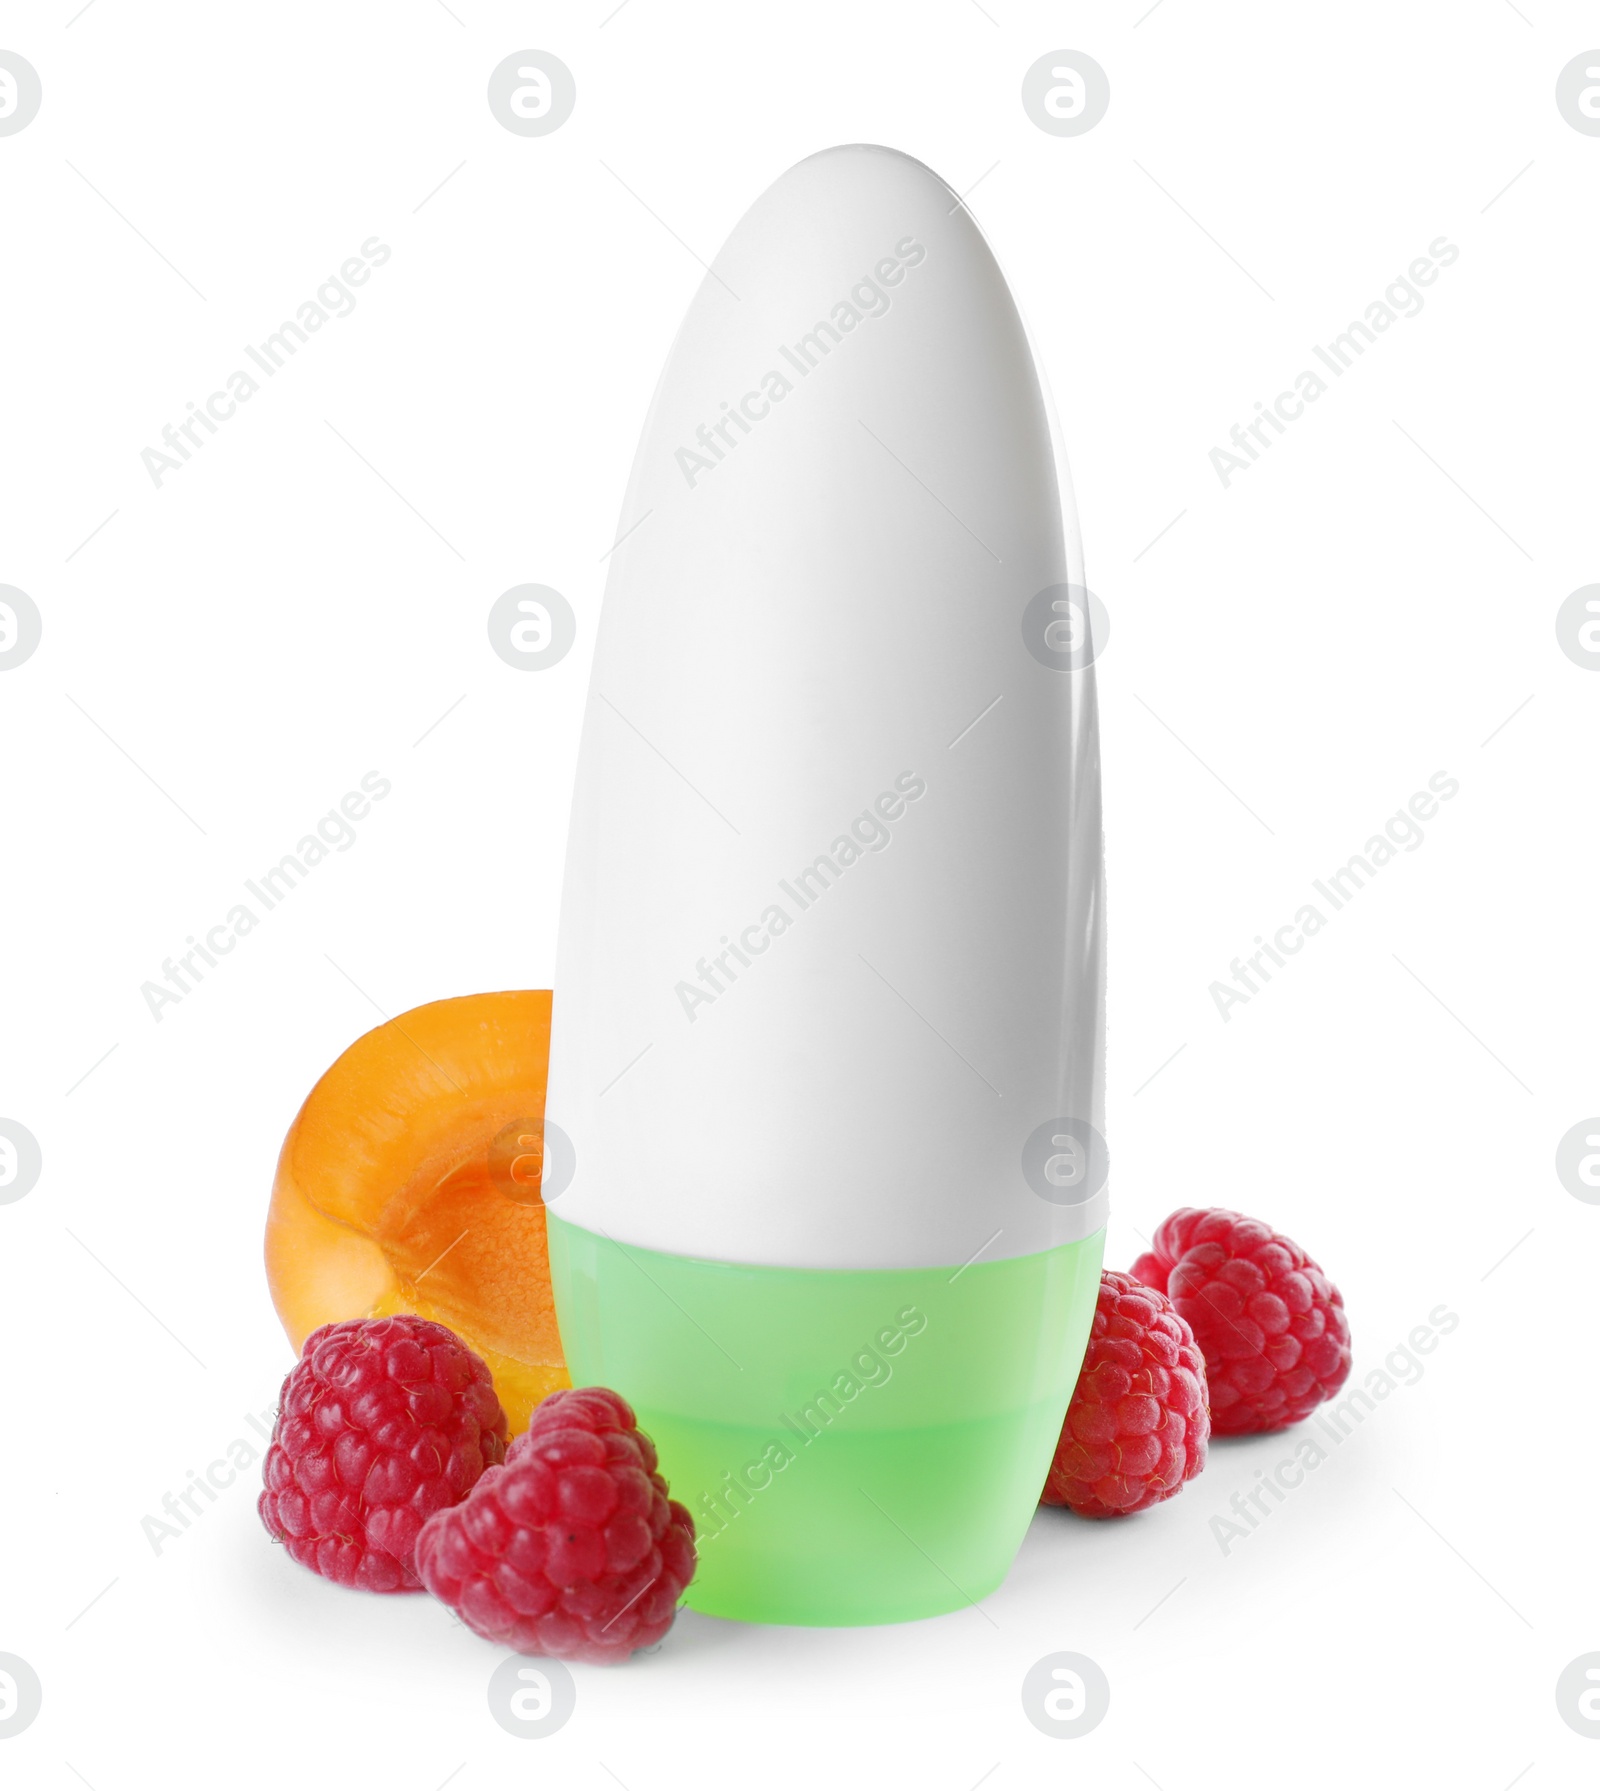 Photo of Natural female roll-on deodorant with fruits on white background